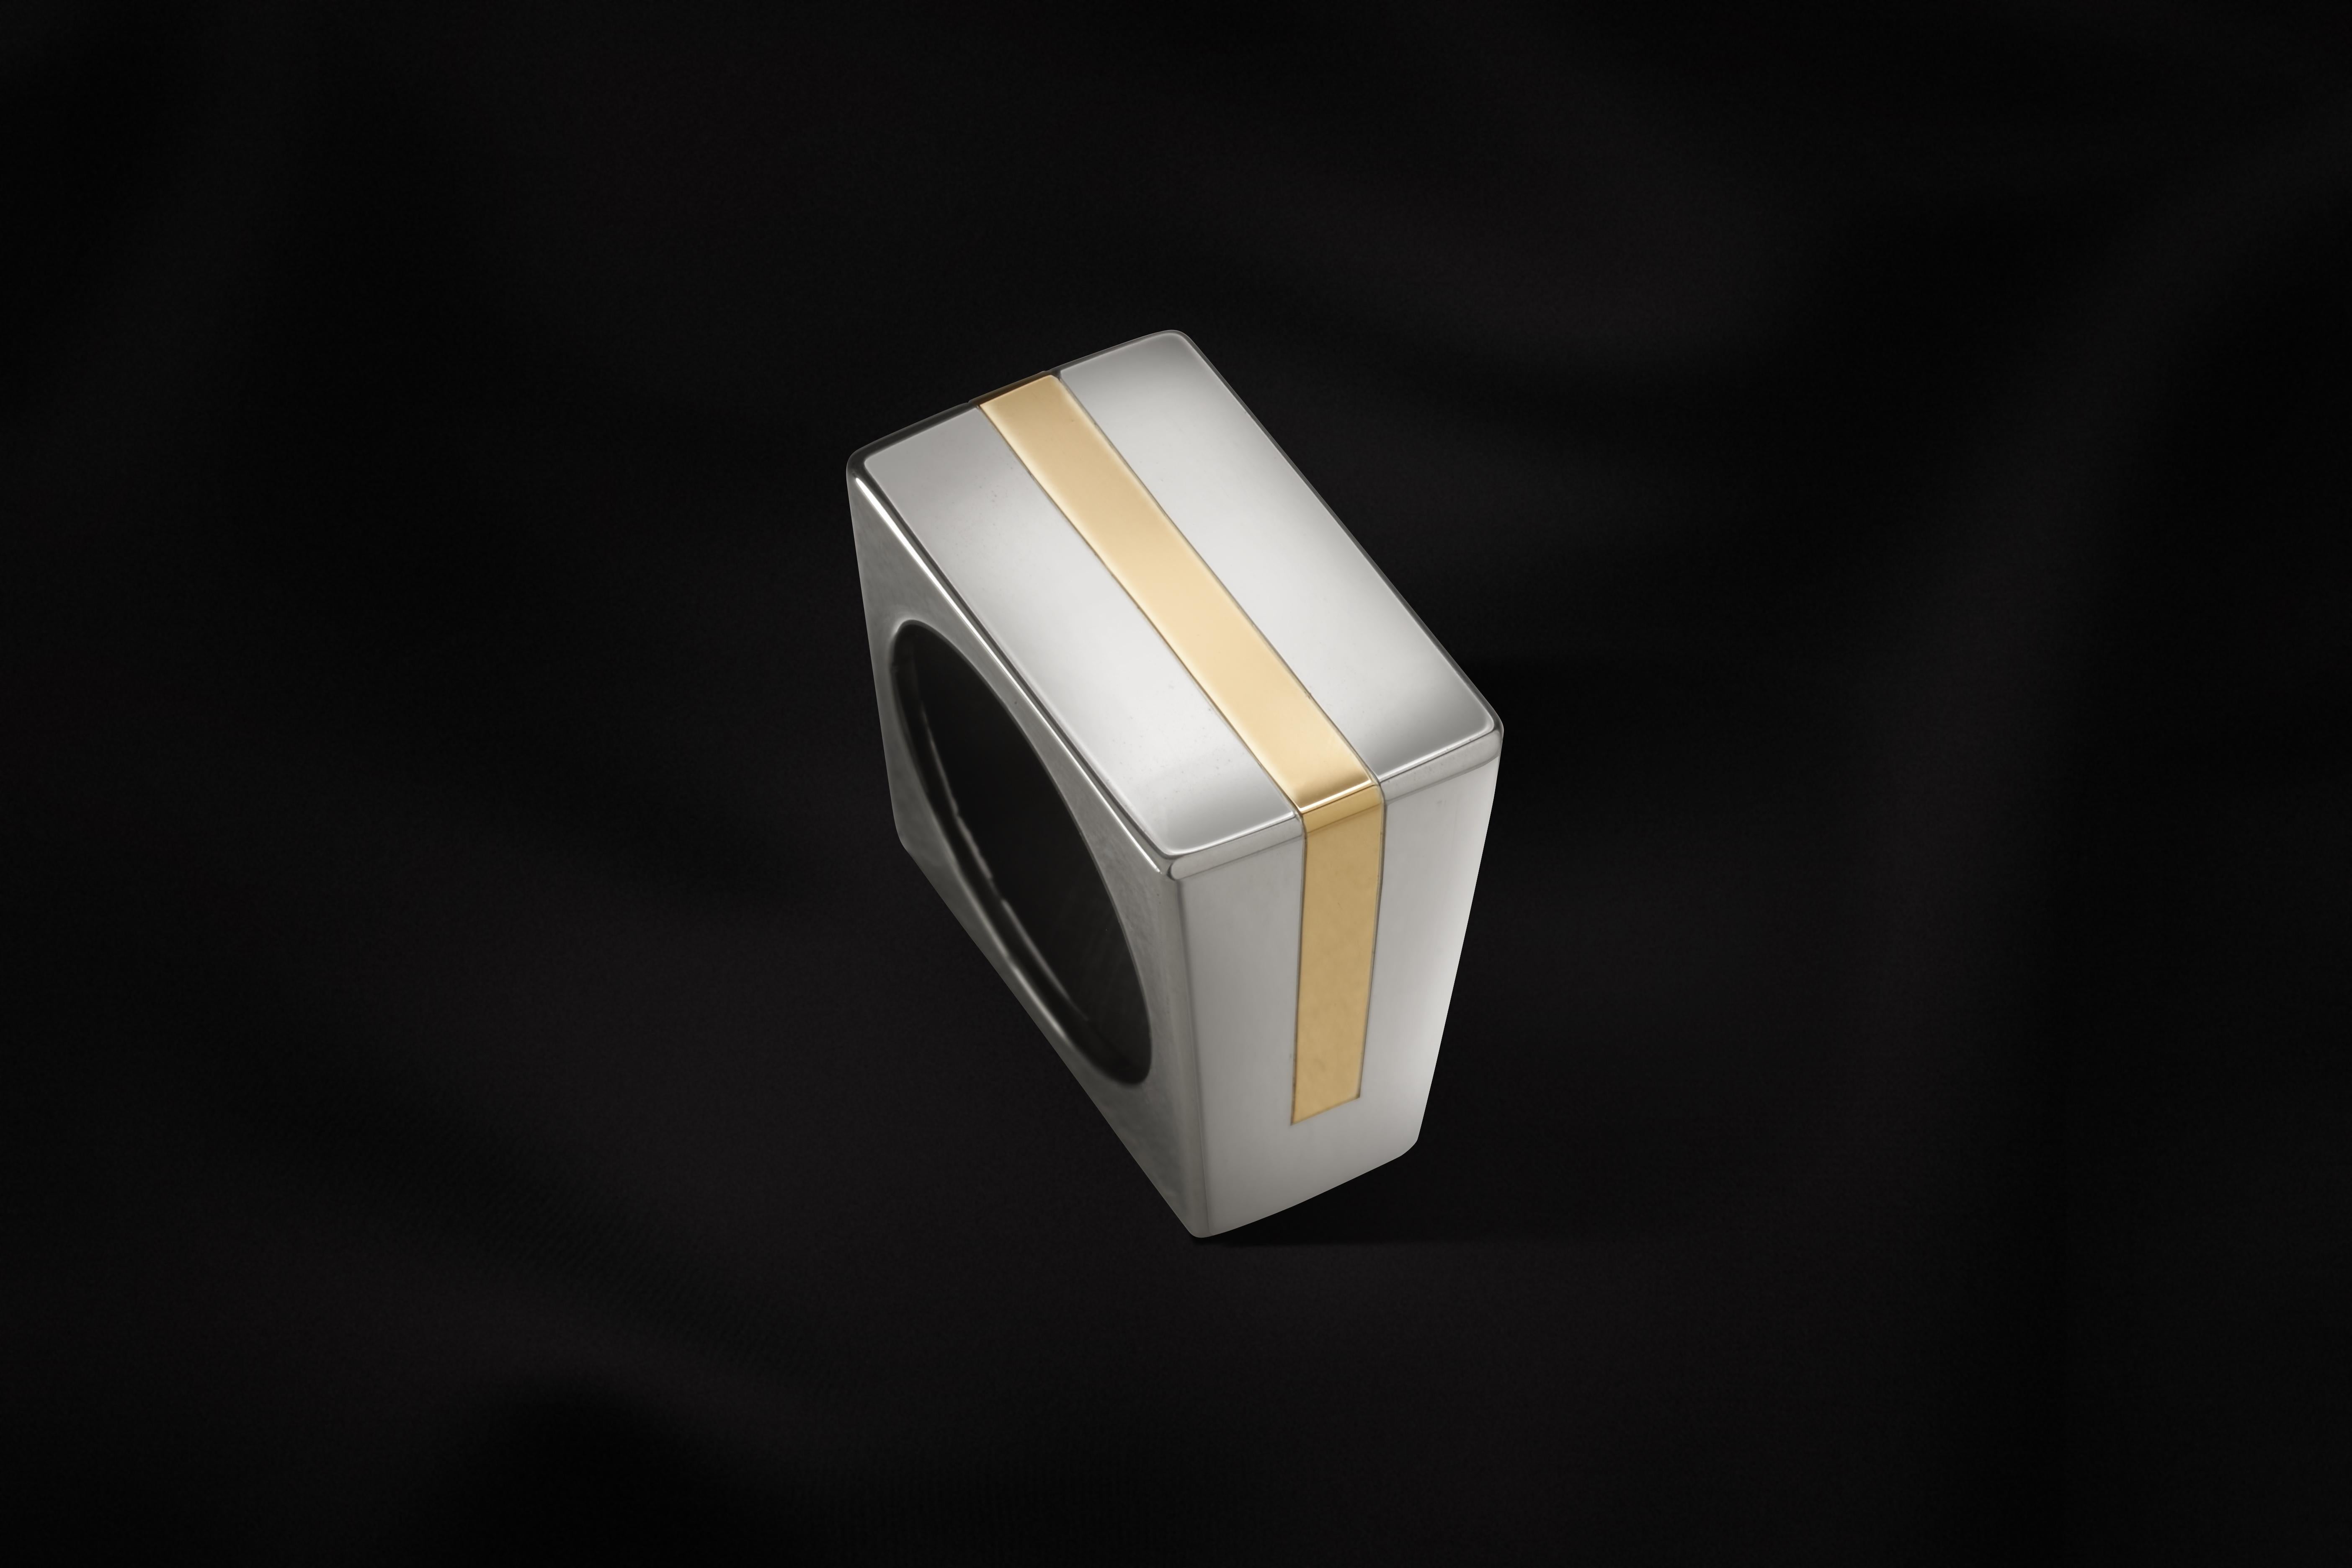 This sculptural, architechtural style ring is handmade in sterling silver and 18k yellow gold.
The base and main material of this square-shaped ring is sterling silver, and the yellow gold line makes the colour contrast.
It has been designed and